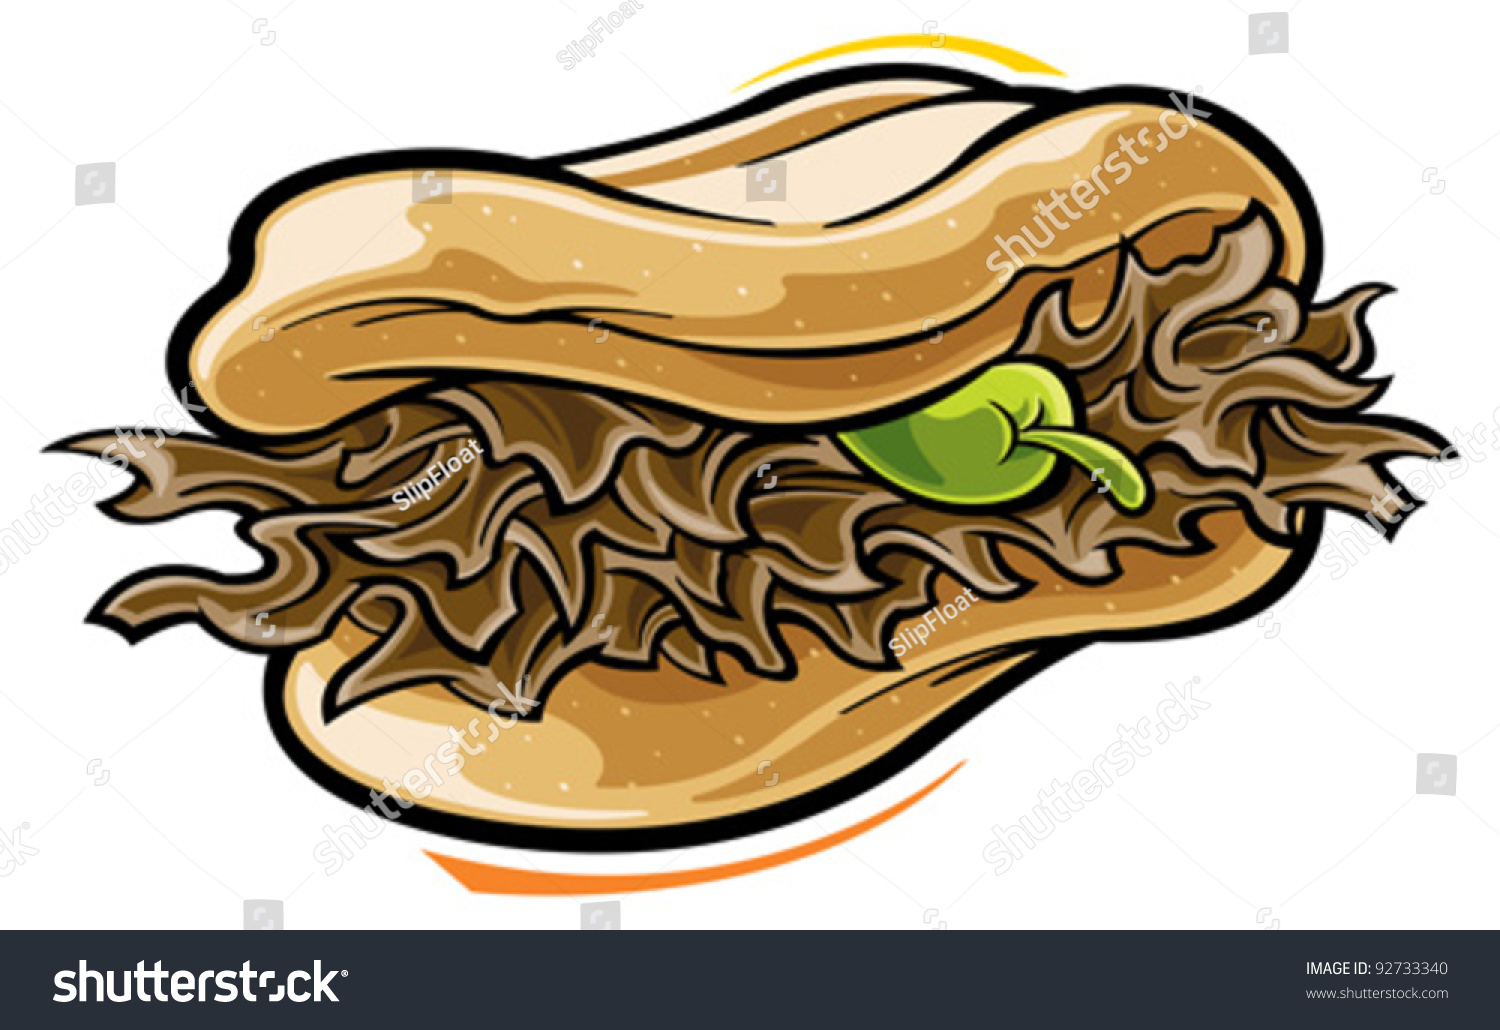 clipart beef - photo #40